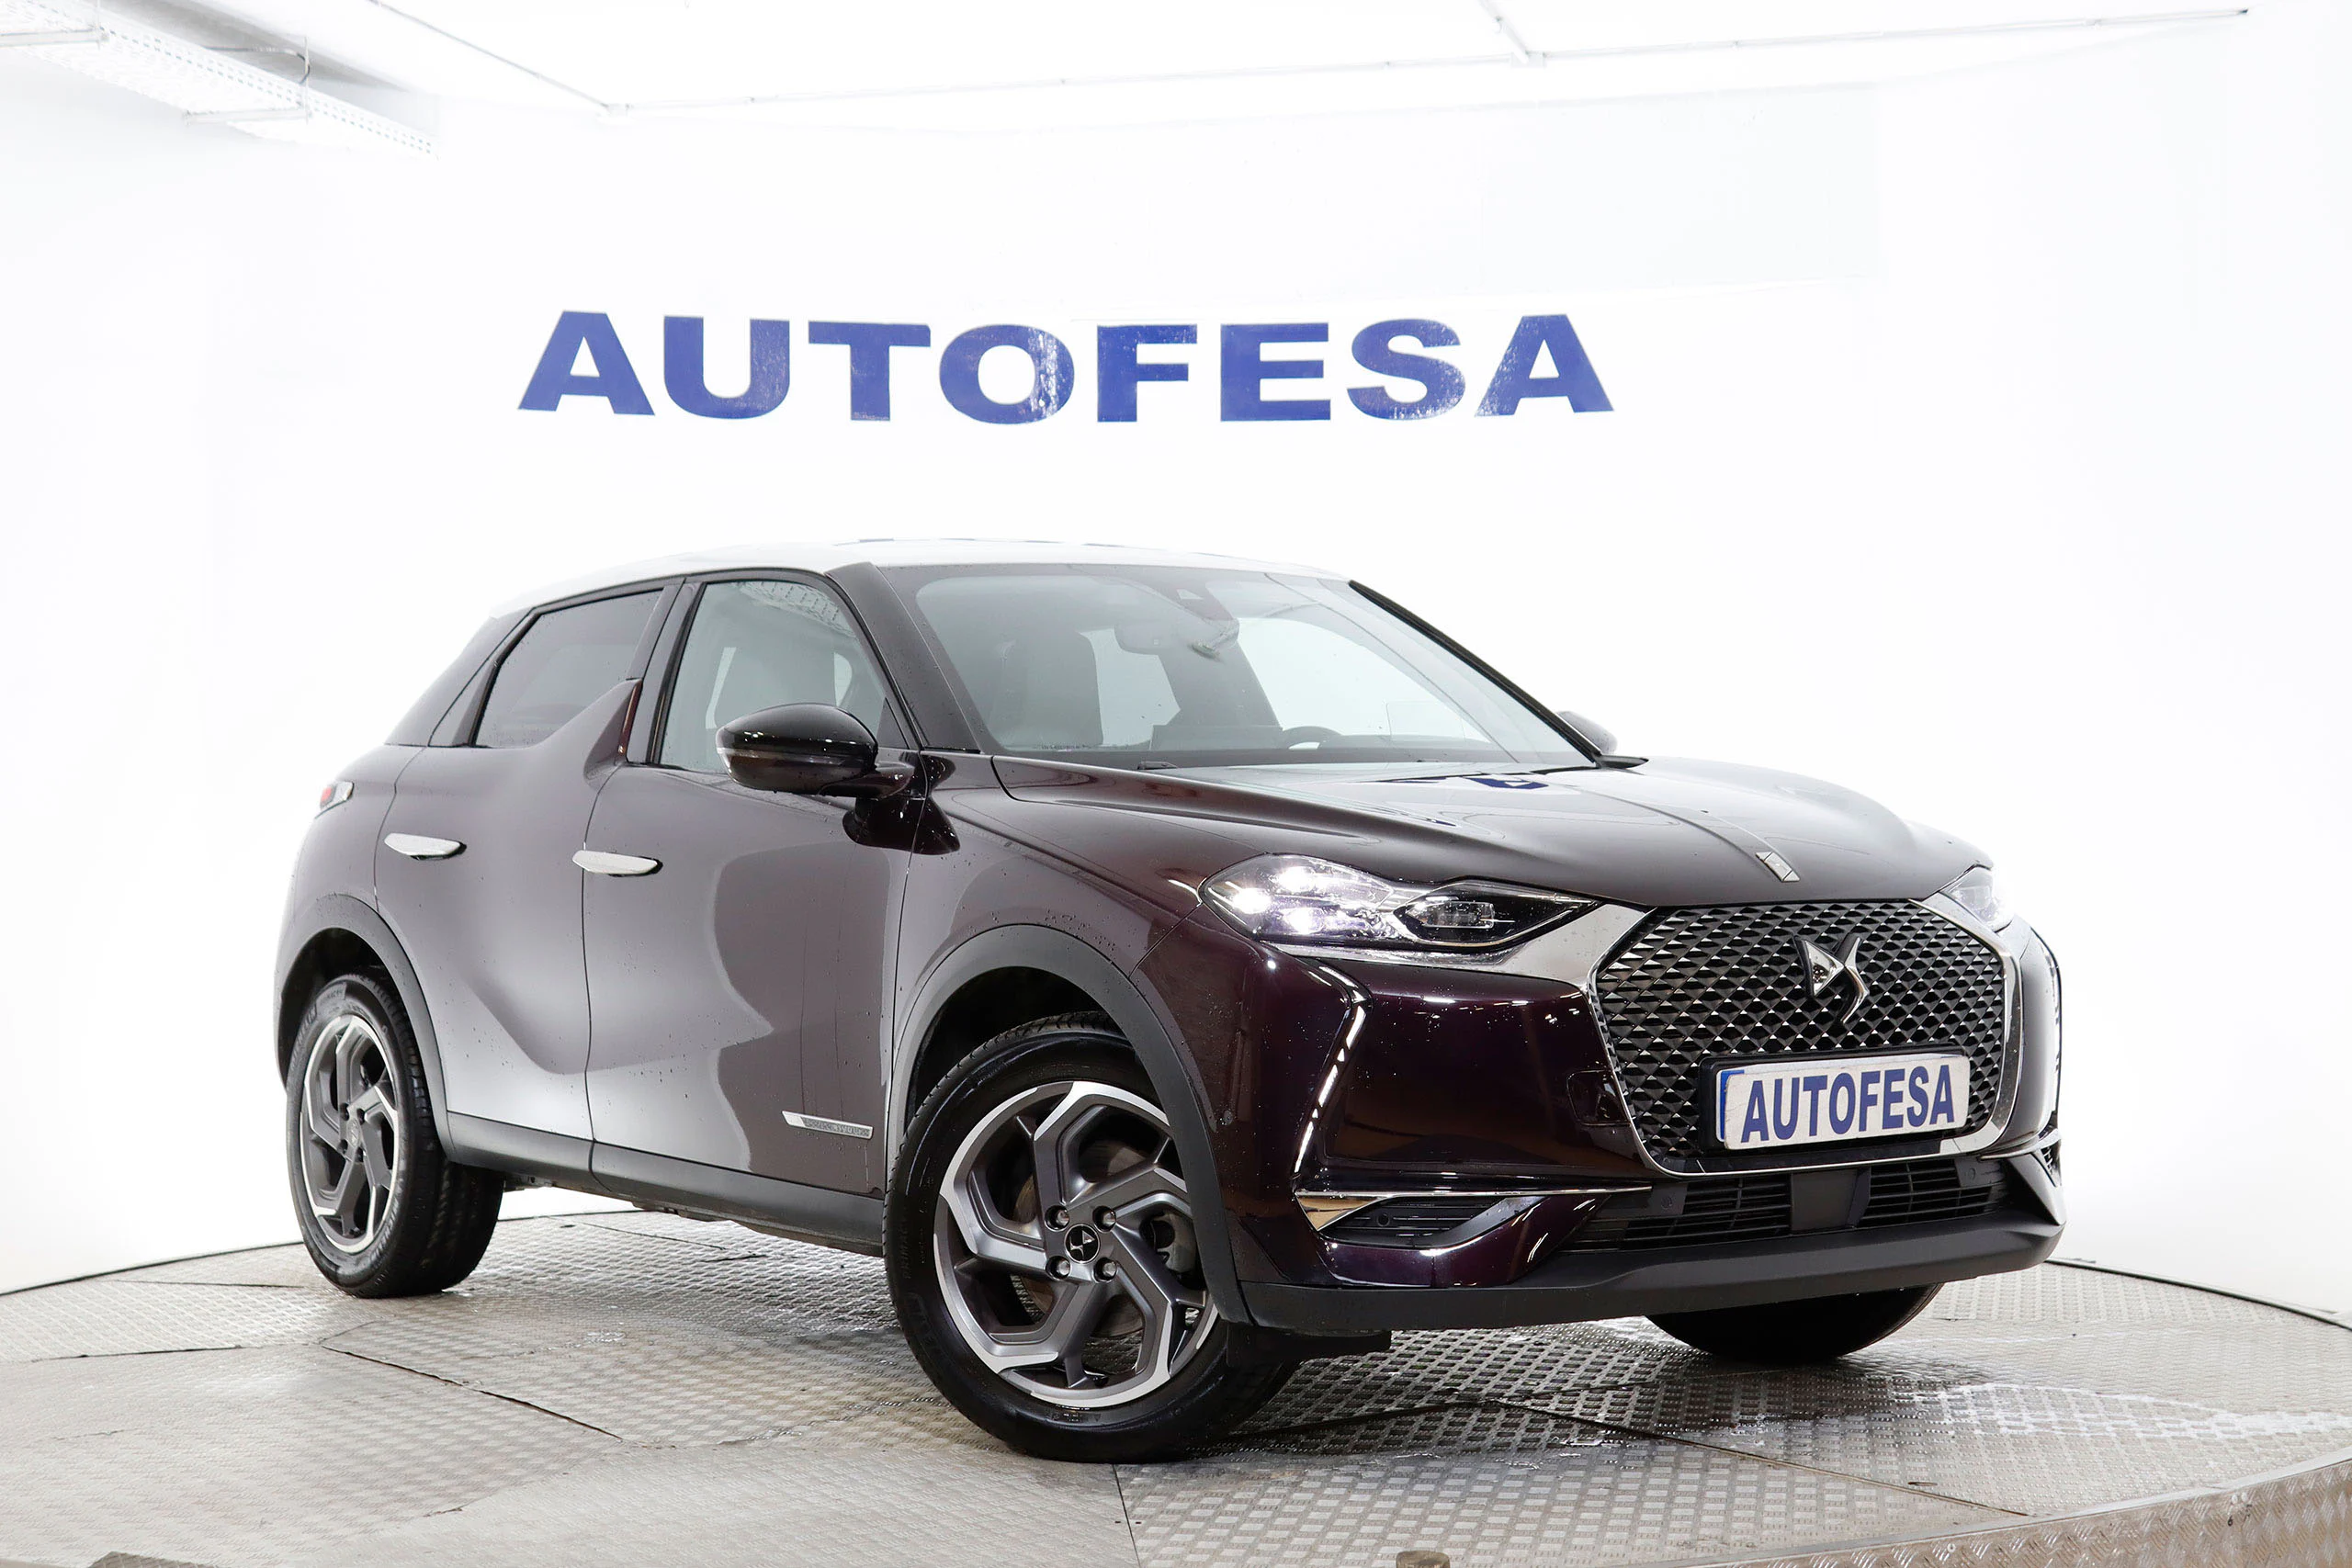 DS DS 3 Crossback 1.2 Grand Chic 130cv Auto 5P S/S # NAVY, FAROS LED - Foto 3